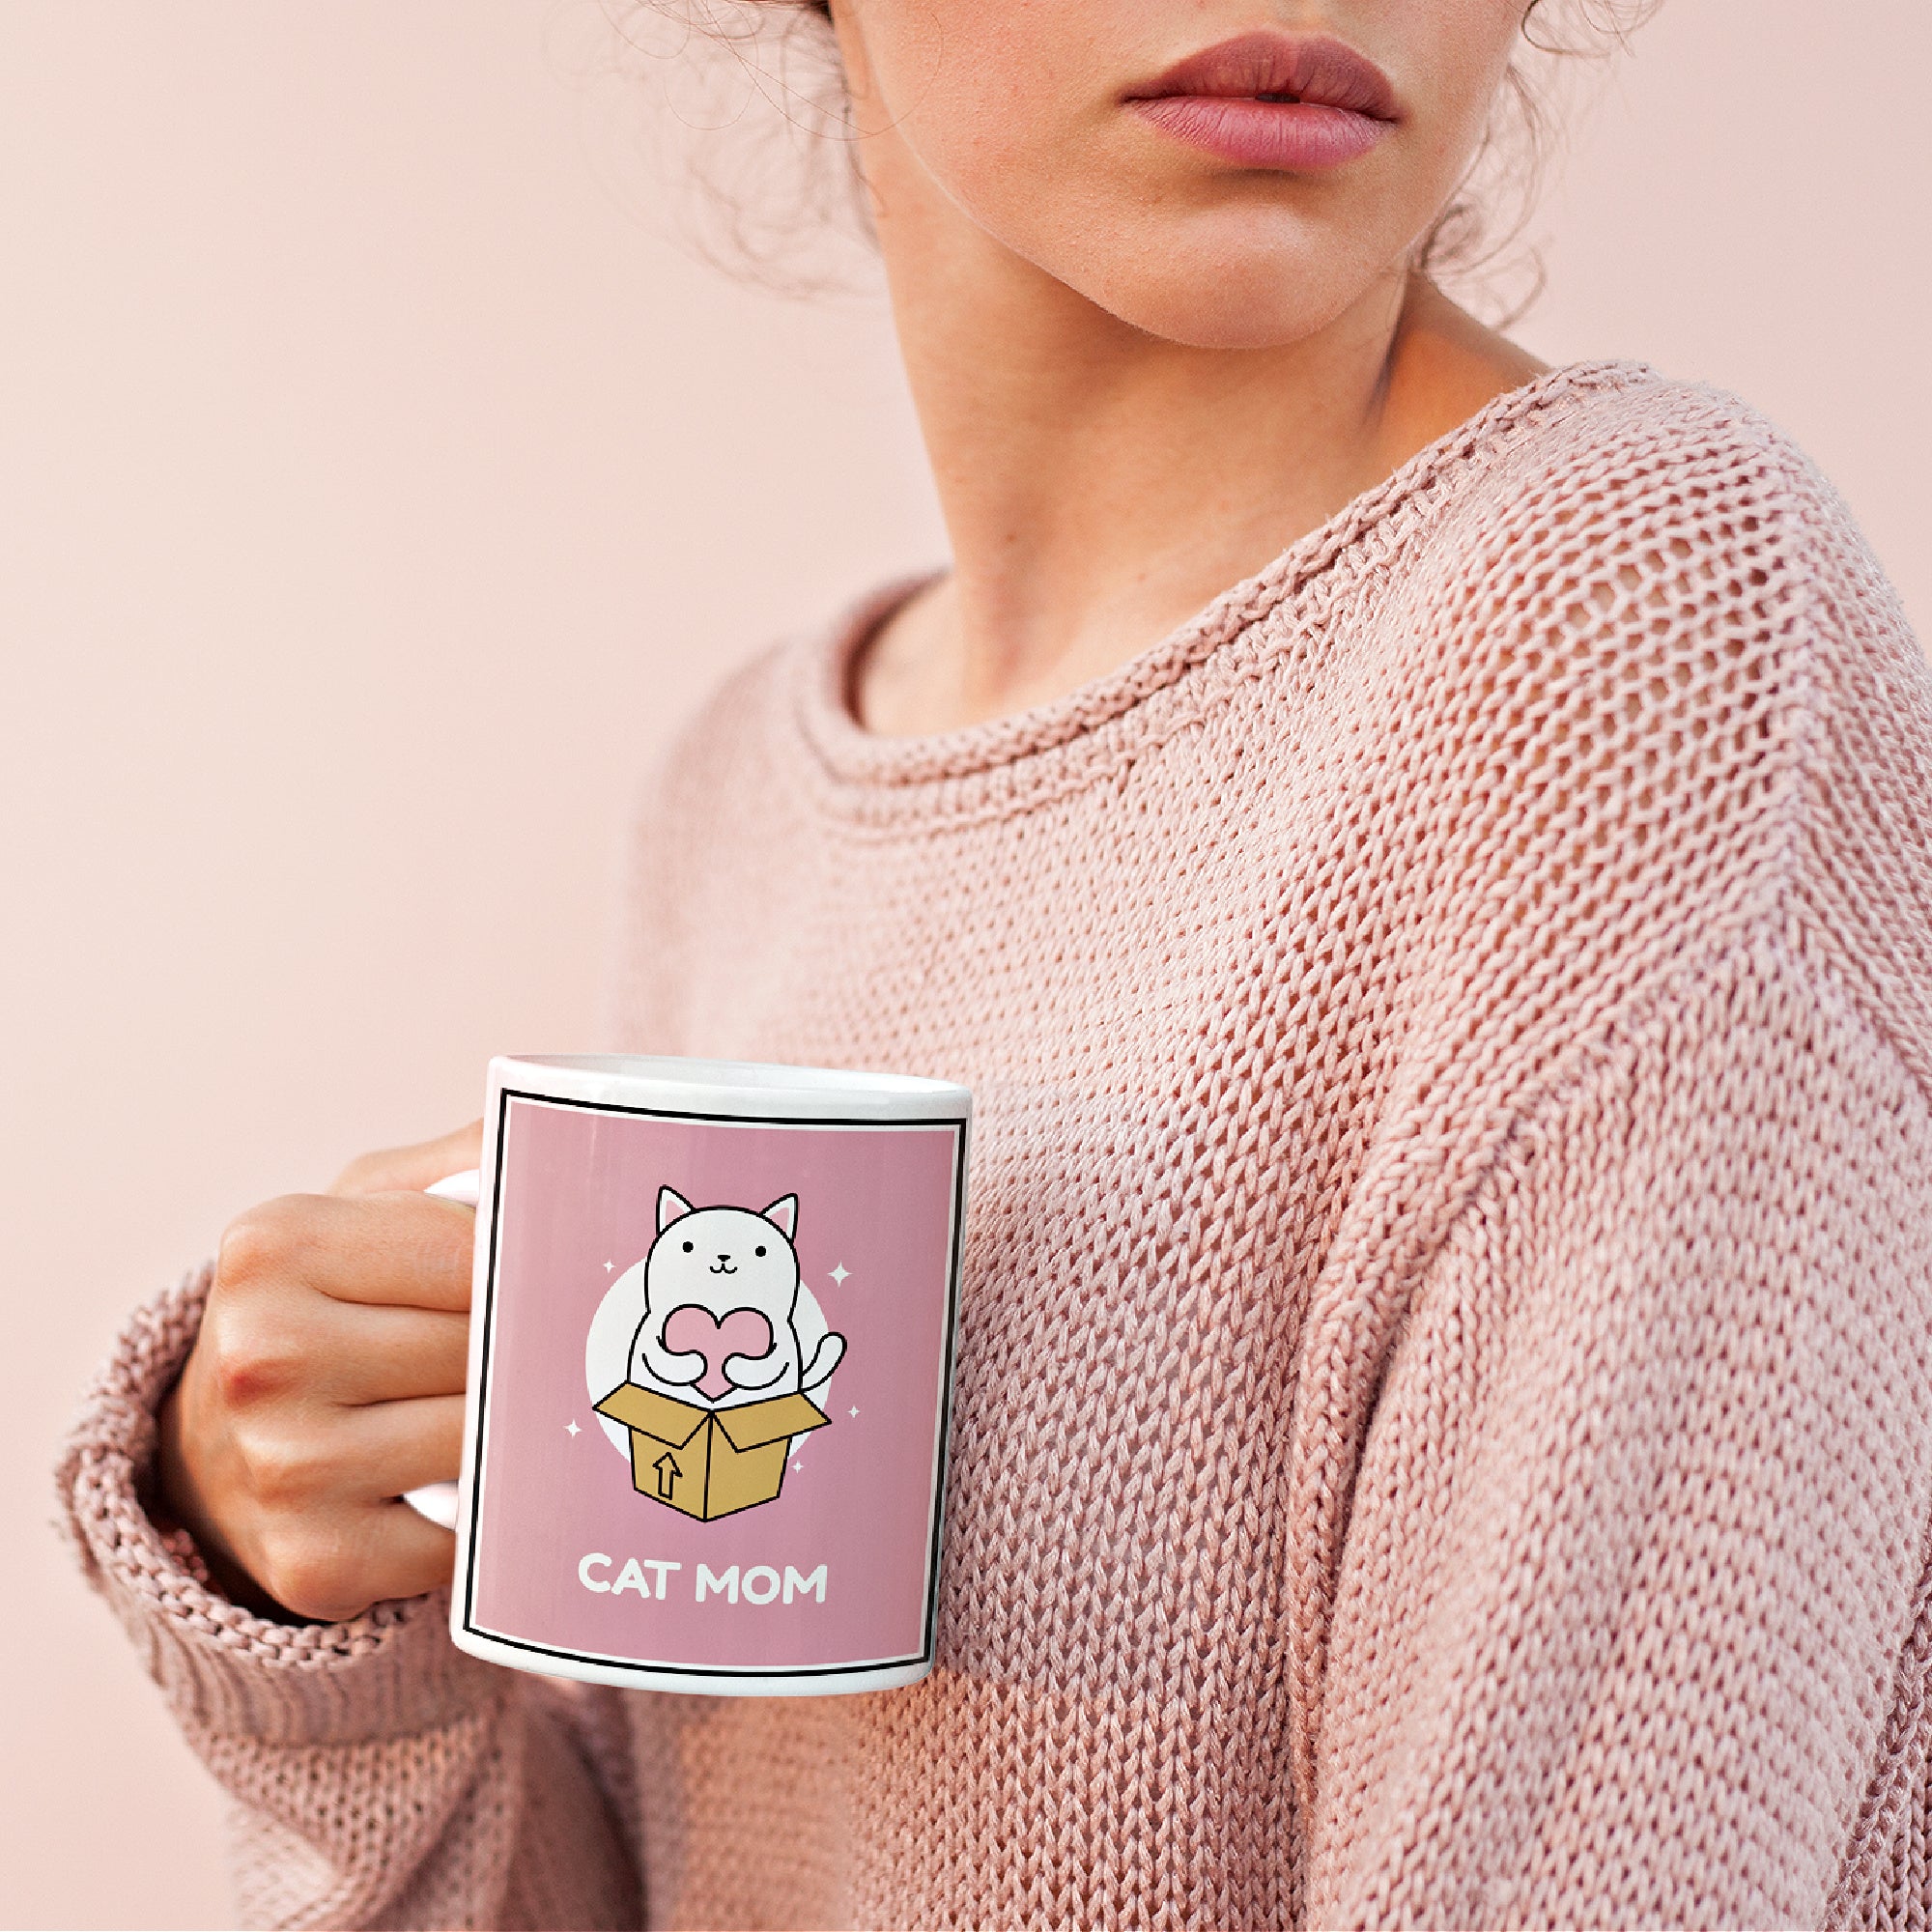 Mug with Cat and text which reads "Cat Mom"